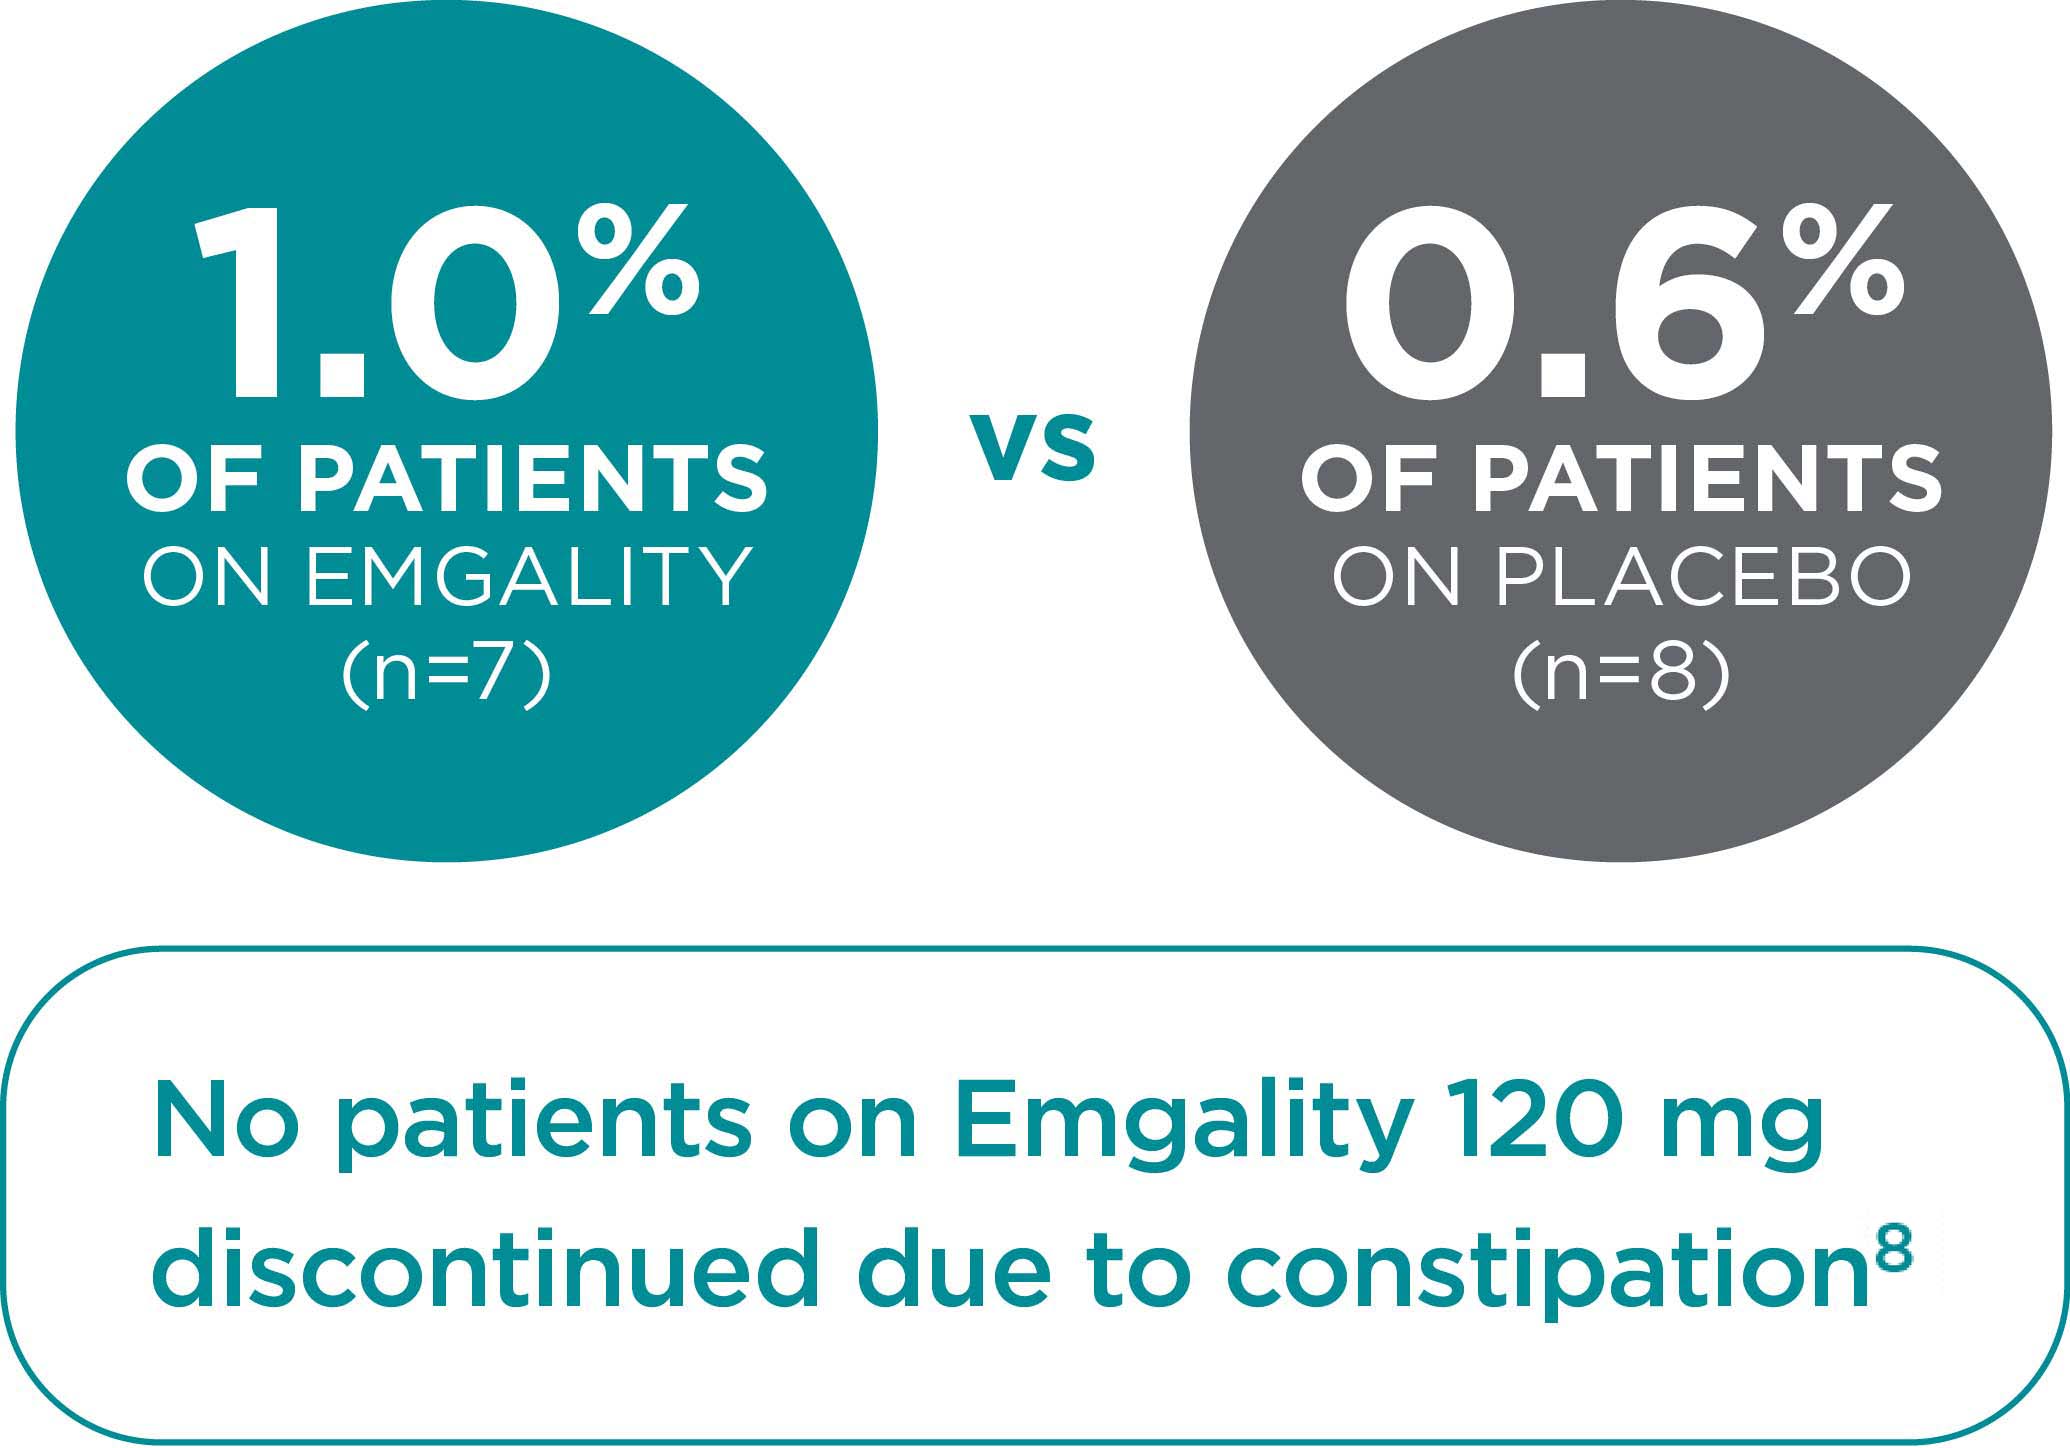 1.0% of patients on Emgality (n=7) vs 0.6% of patients on placebo (n=8)